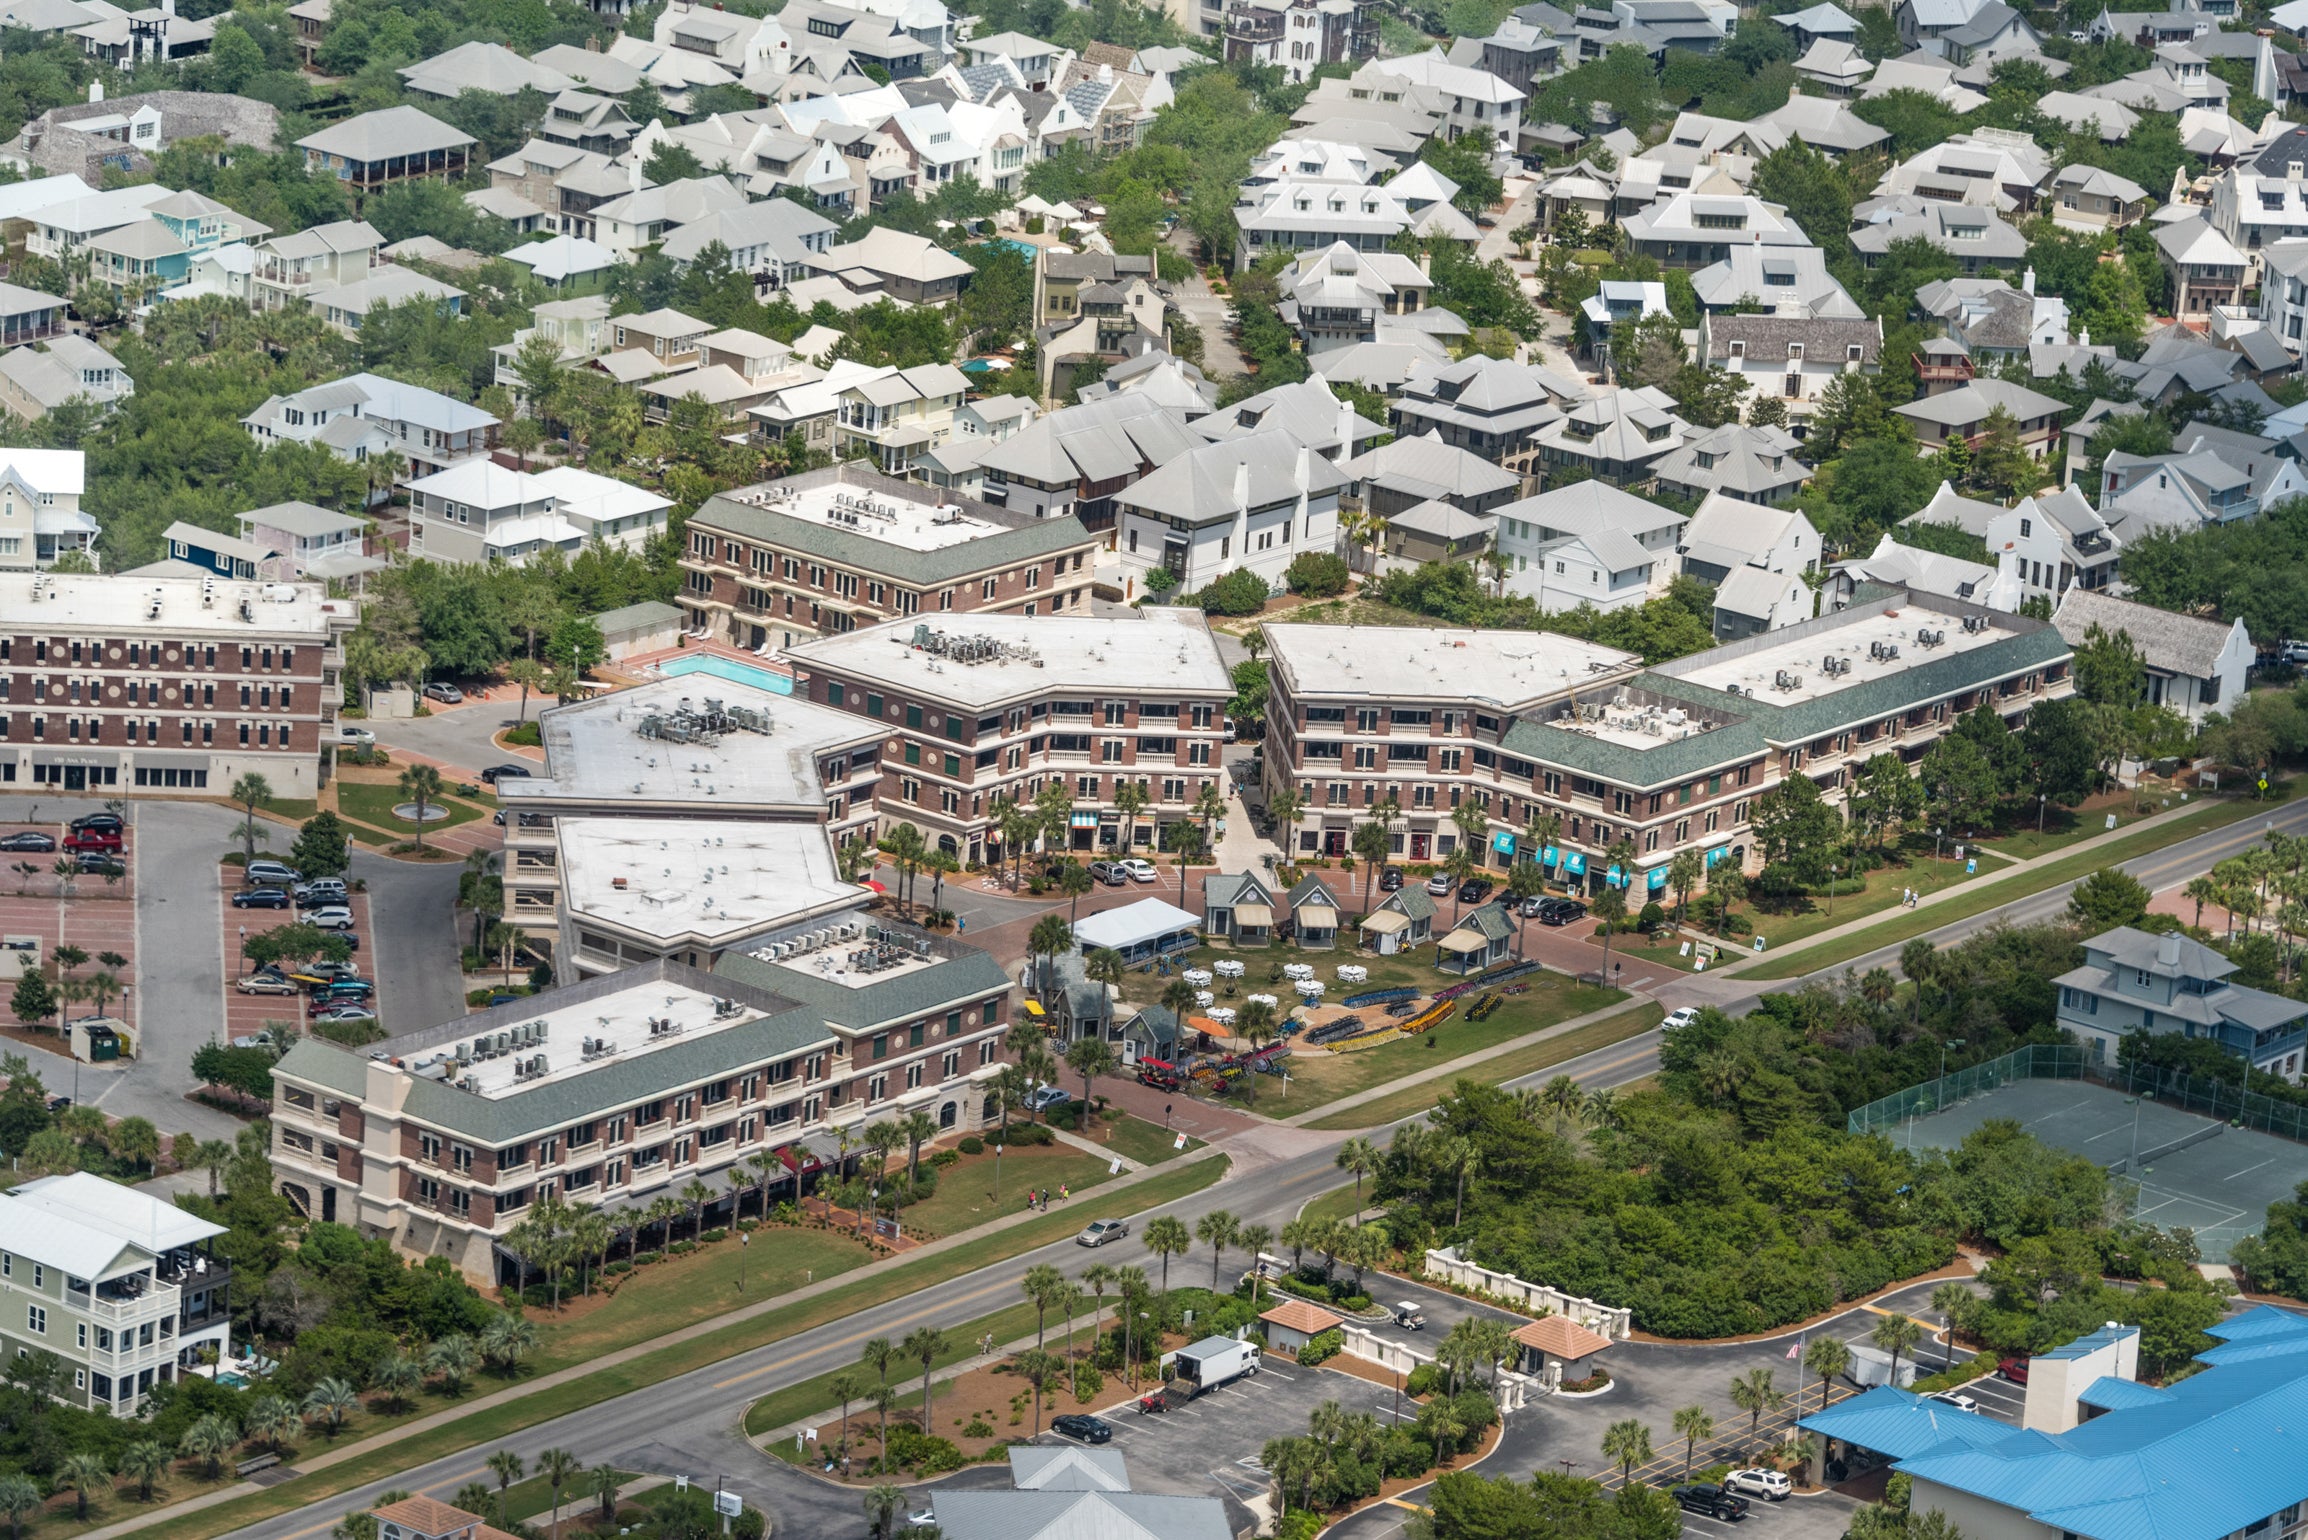 Aerial view of Village of South Walton